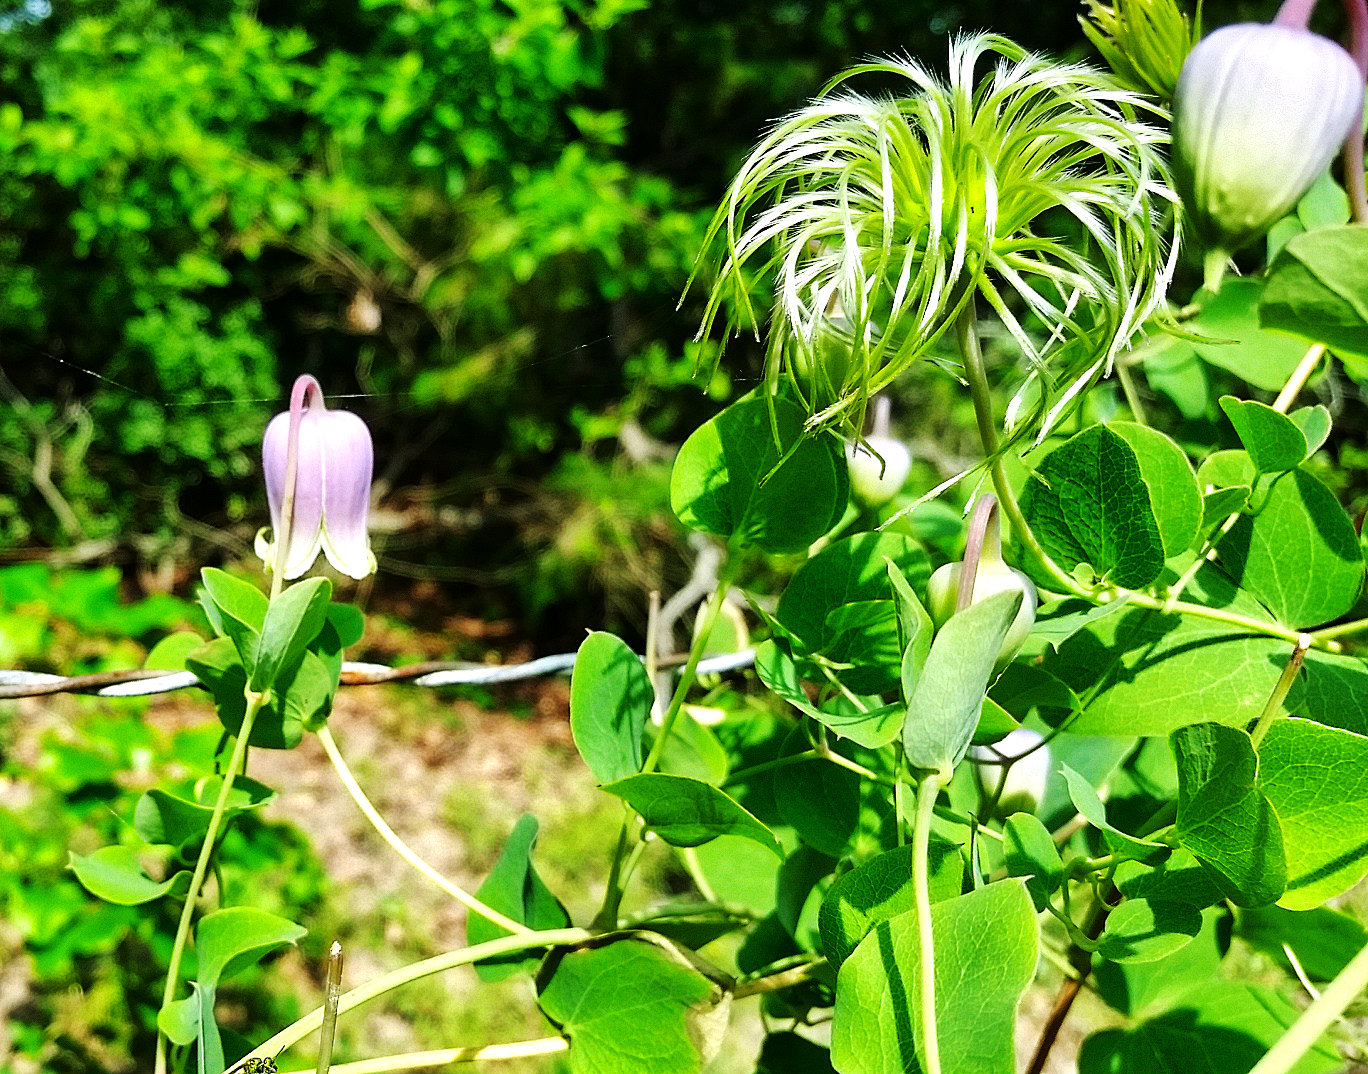 Seedheads rival the beauty of these bell-shaped clematis blooms.